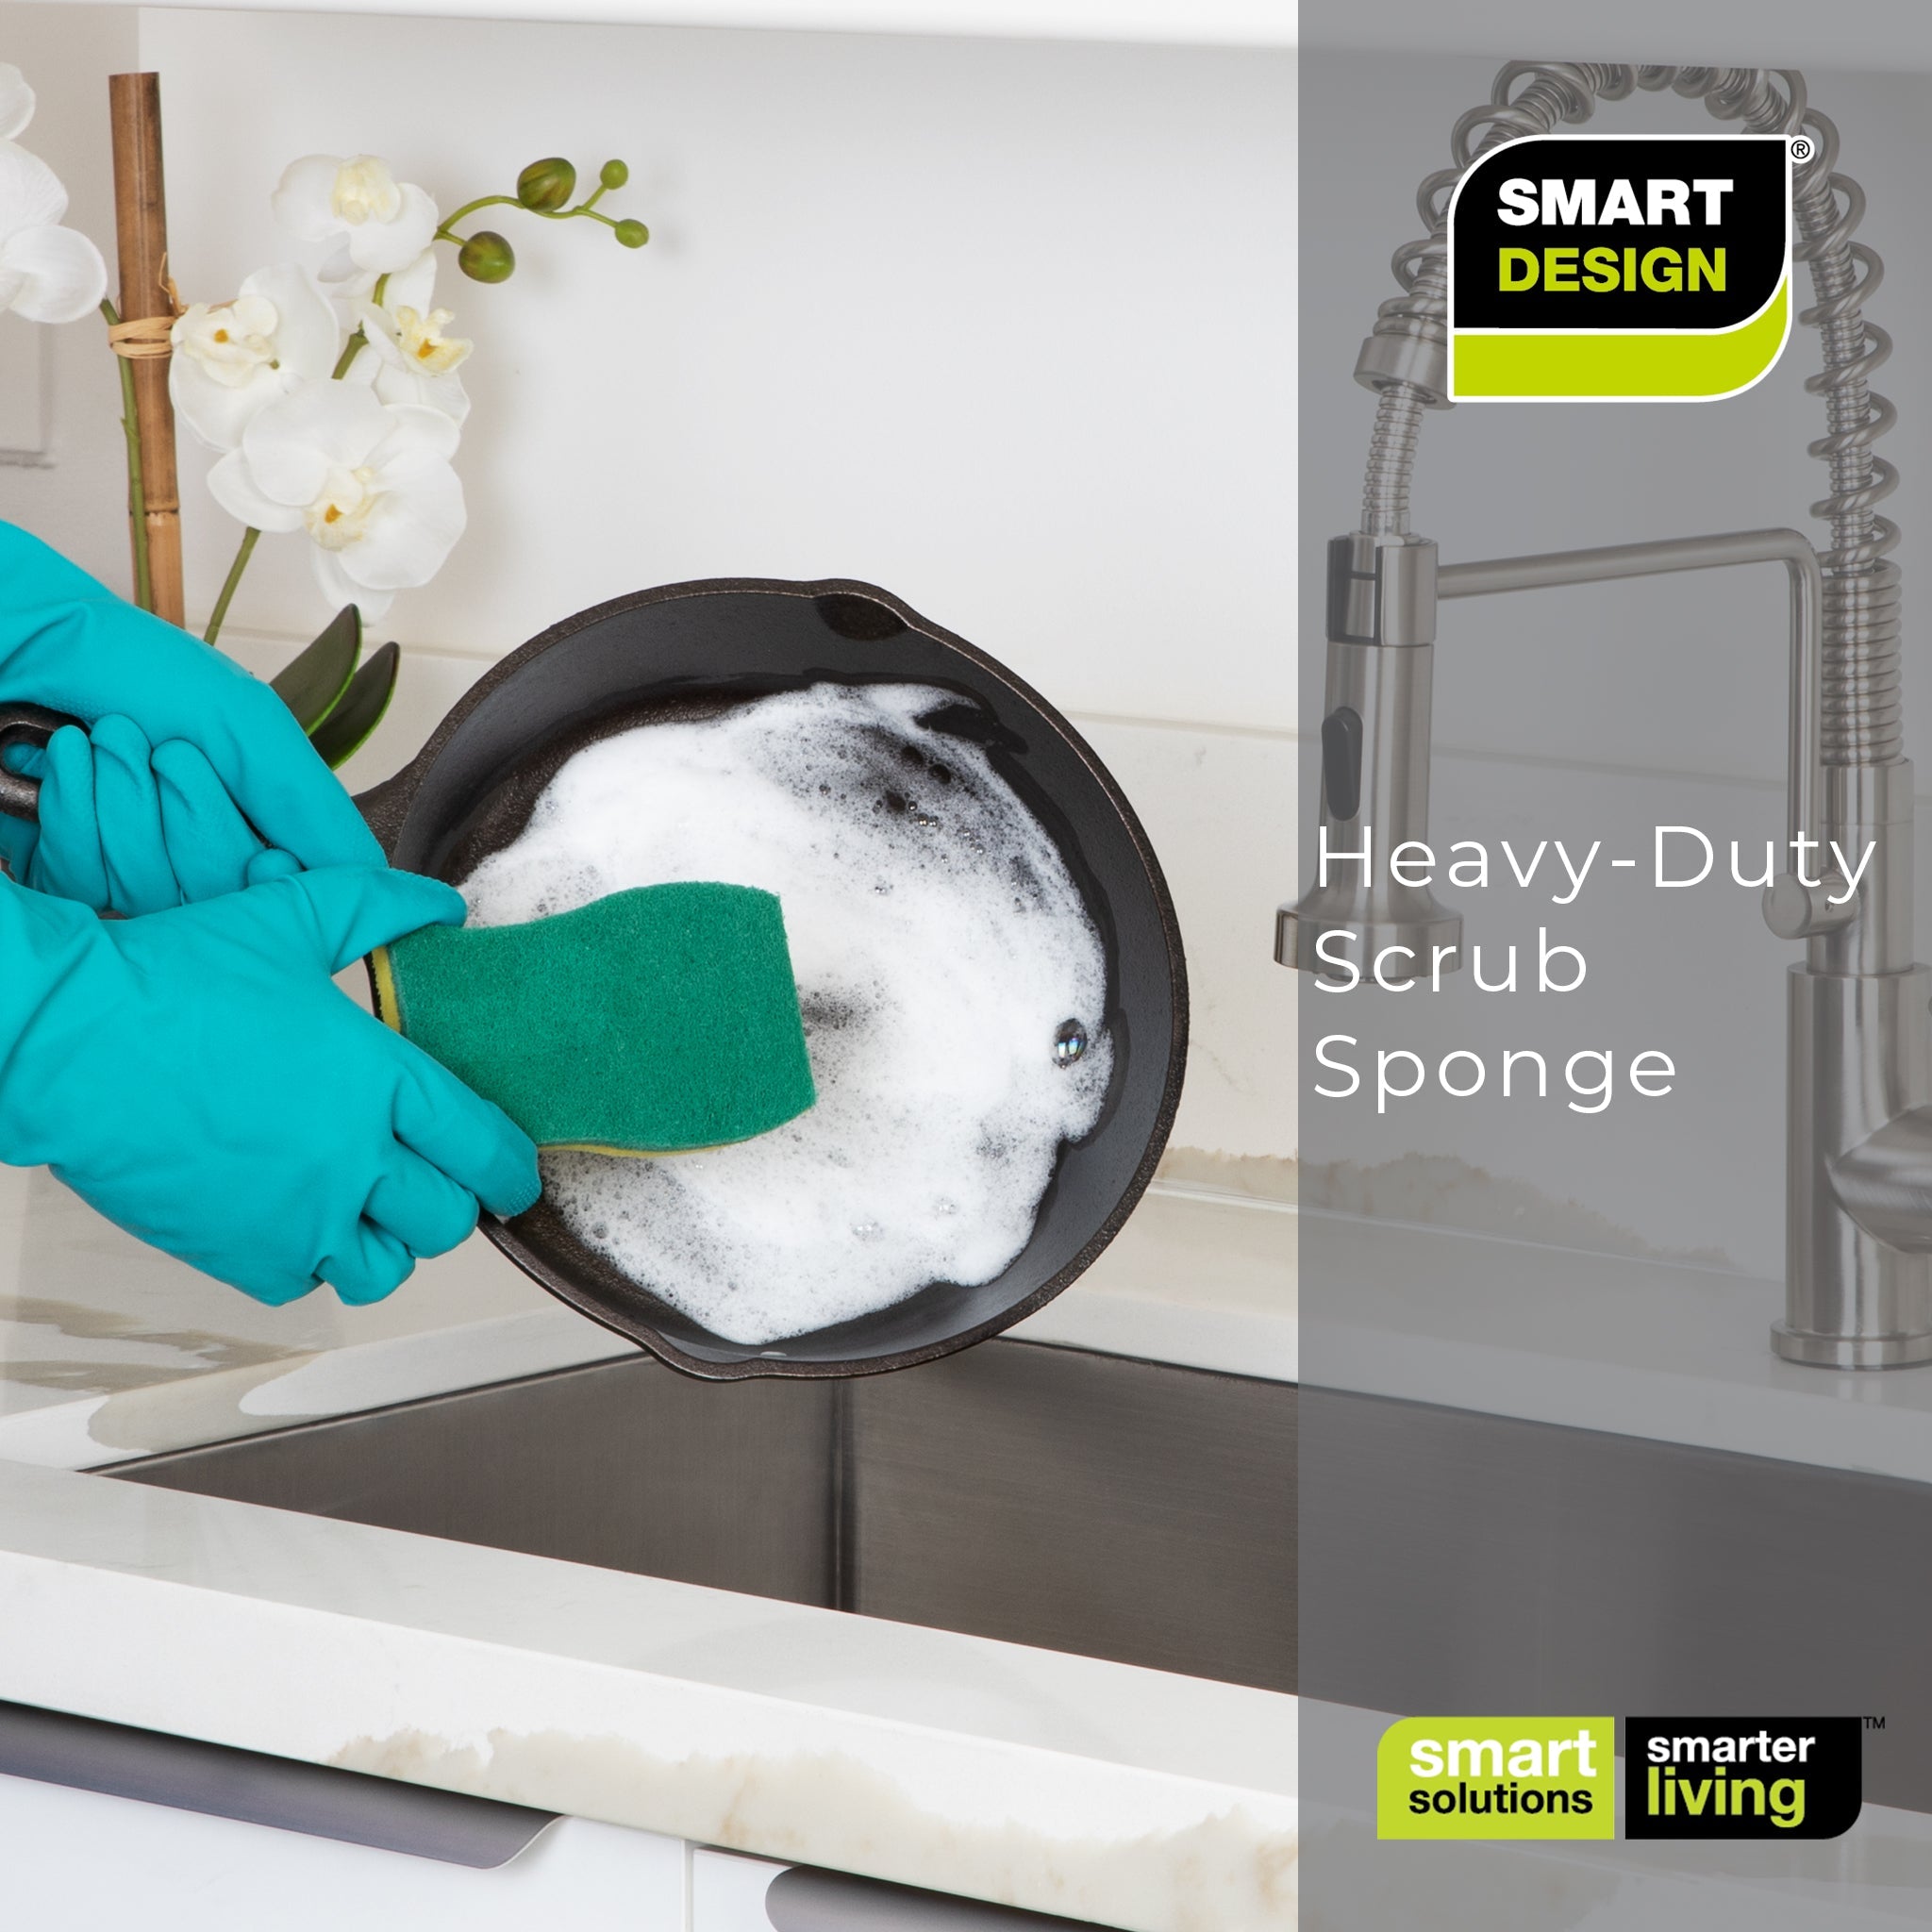 Heavy Duty Scrub Sponge - Ultra Absorbent - Ergonomic Shape - Cleaning, Dishes, & Hard Stains - Green by Smart Design 16